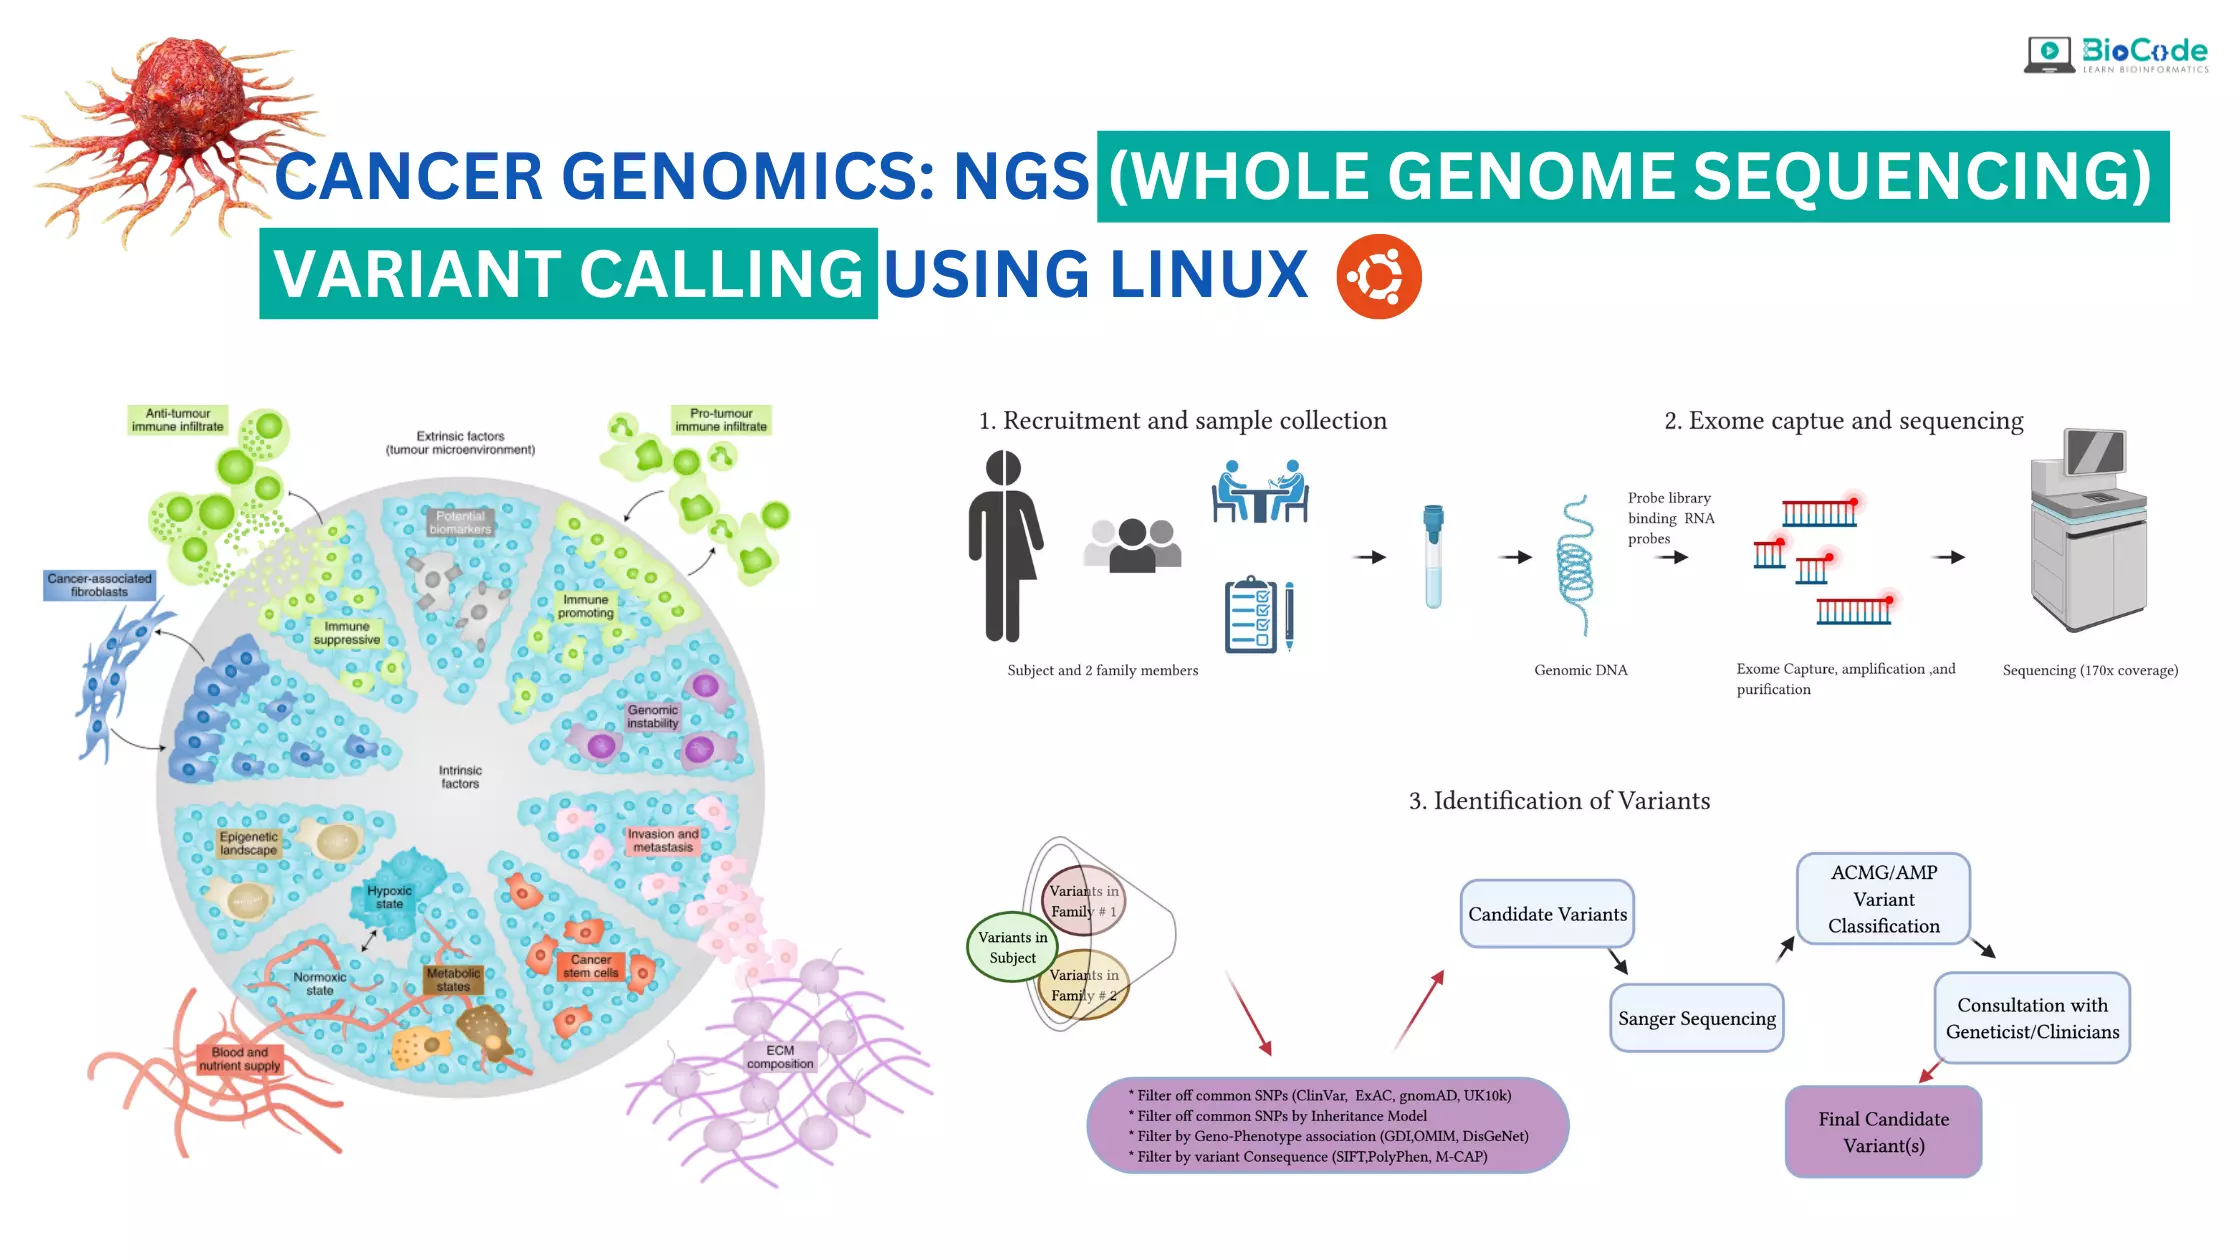 Cancer Genomics: NGS (Whole Genome Sequencing) Variant Calling Using Linux